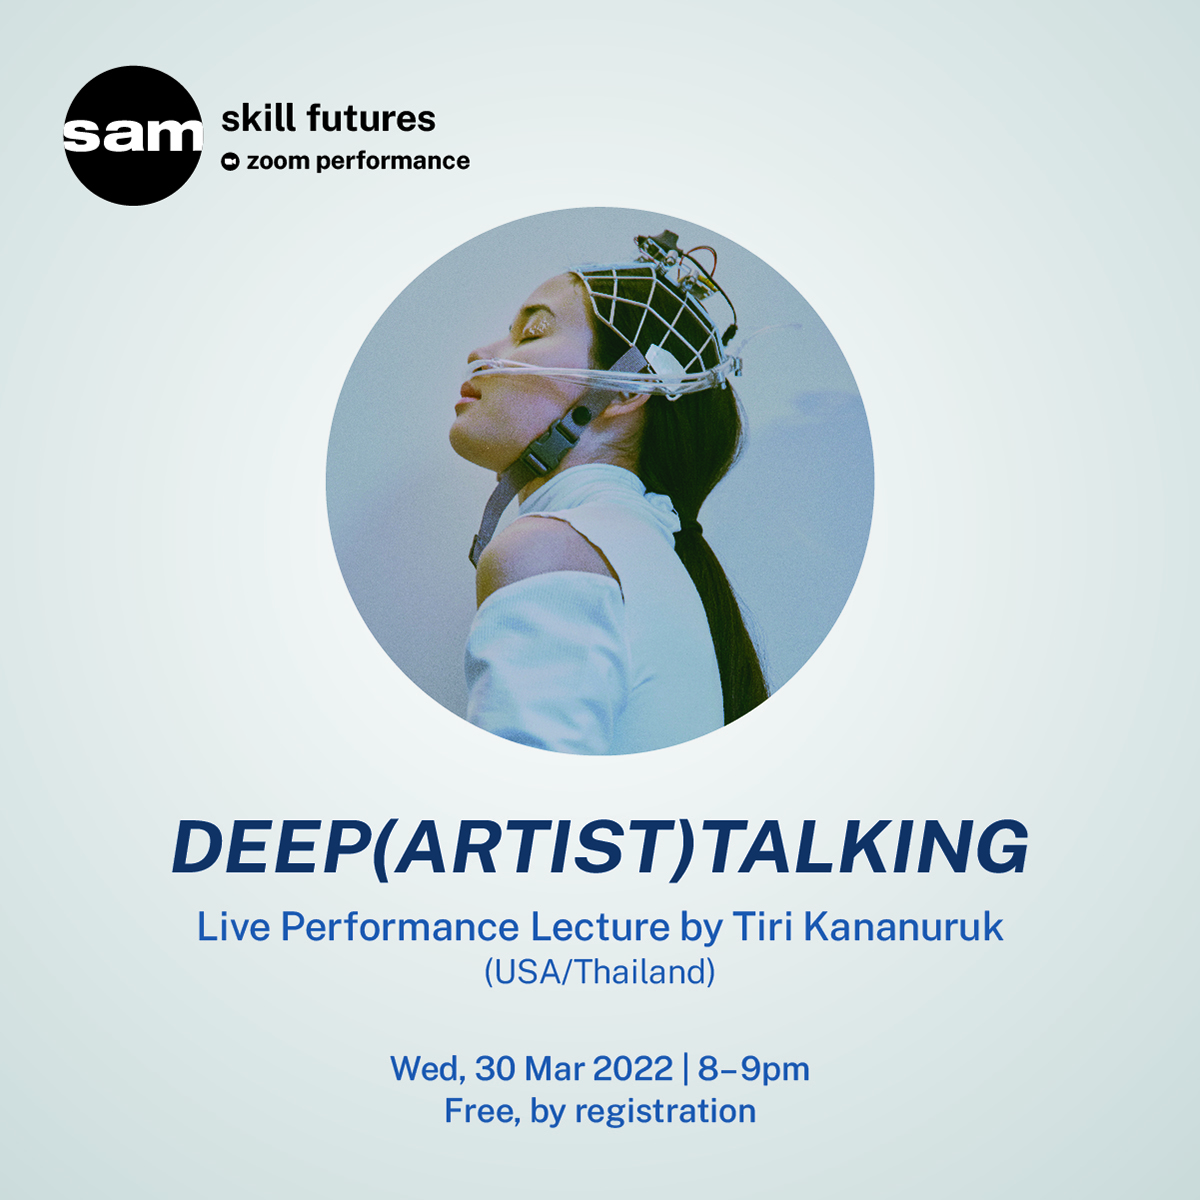 Deep(Artist)Talking Live Performance Lecture